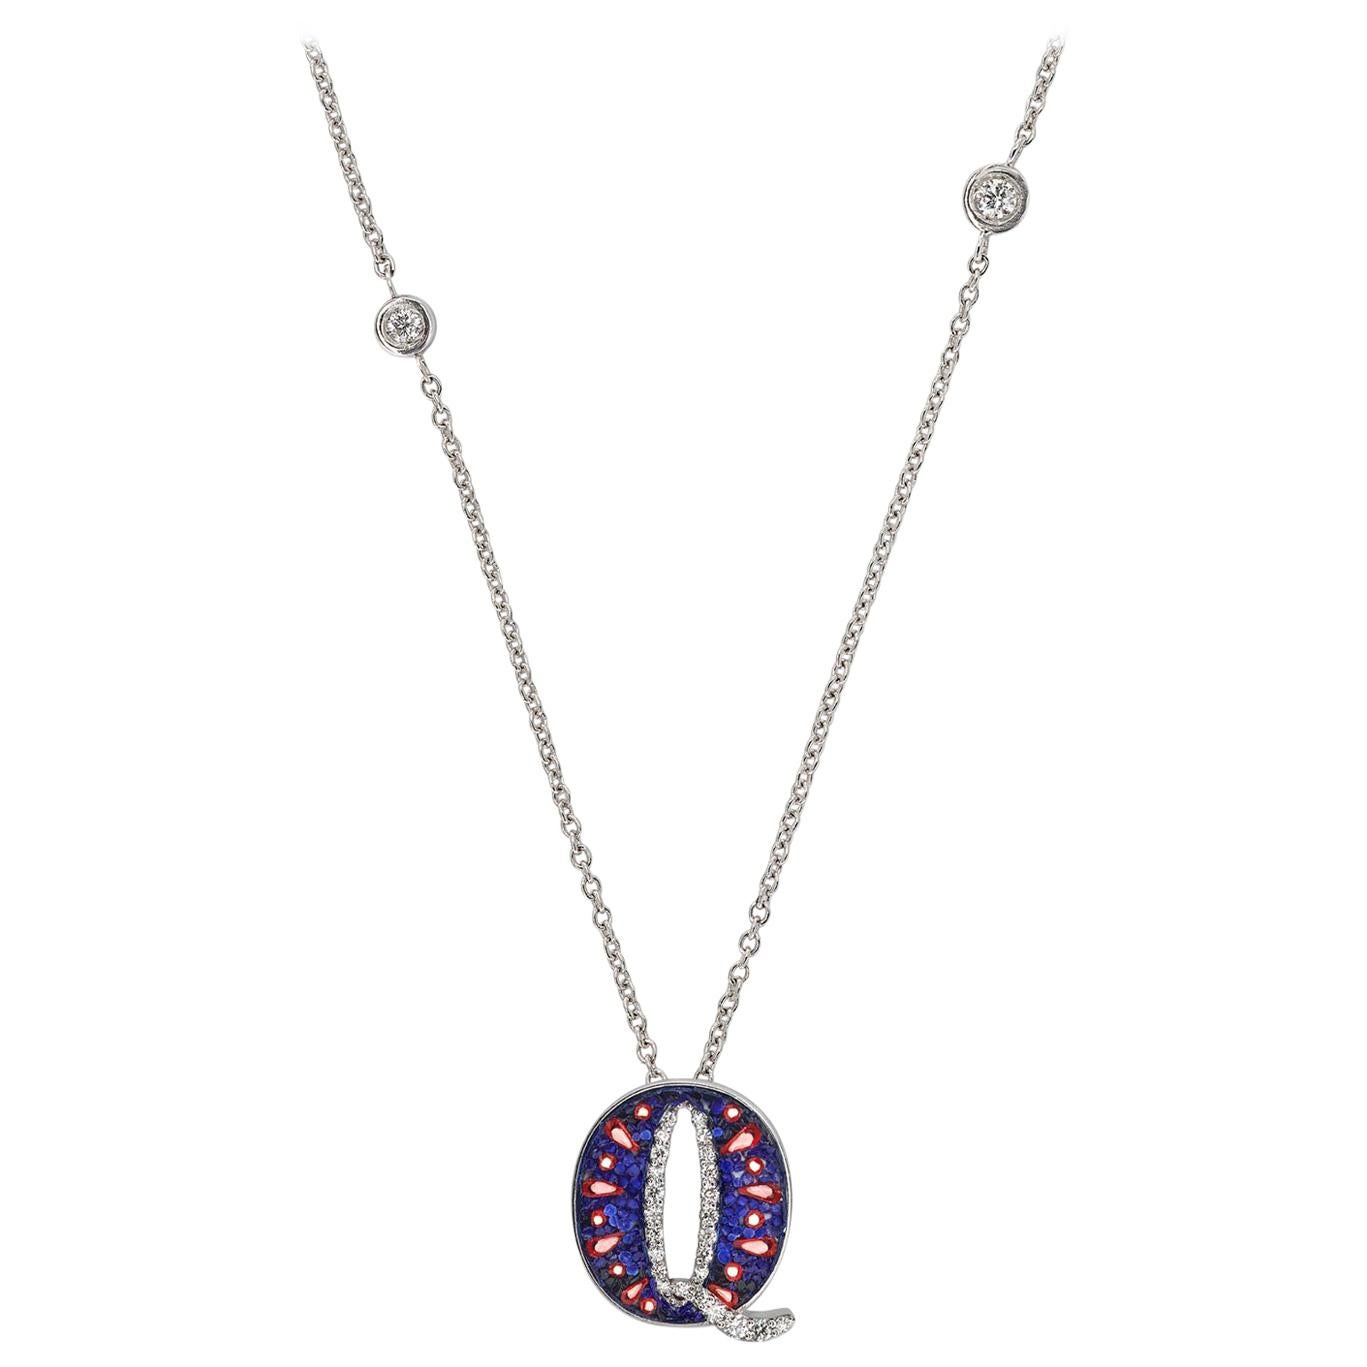 Necklace Letter Q White Gold White Diamonds Hand Decorated with Micromosaic